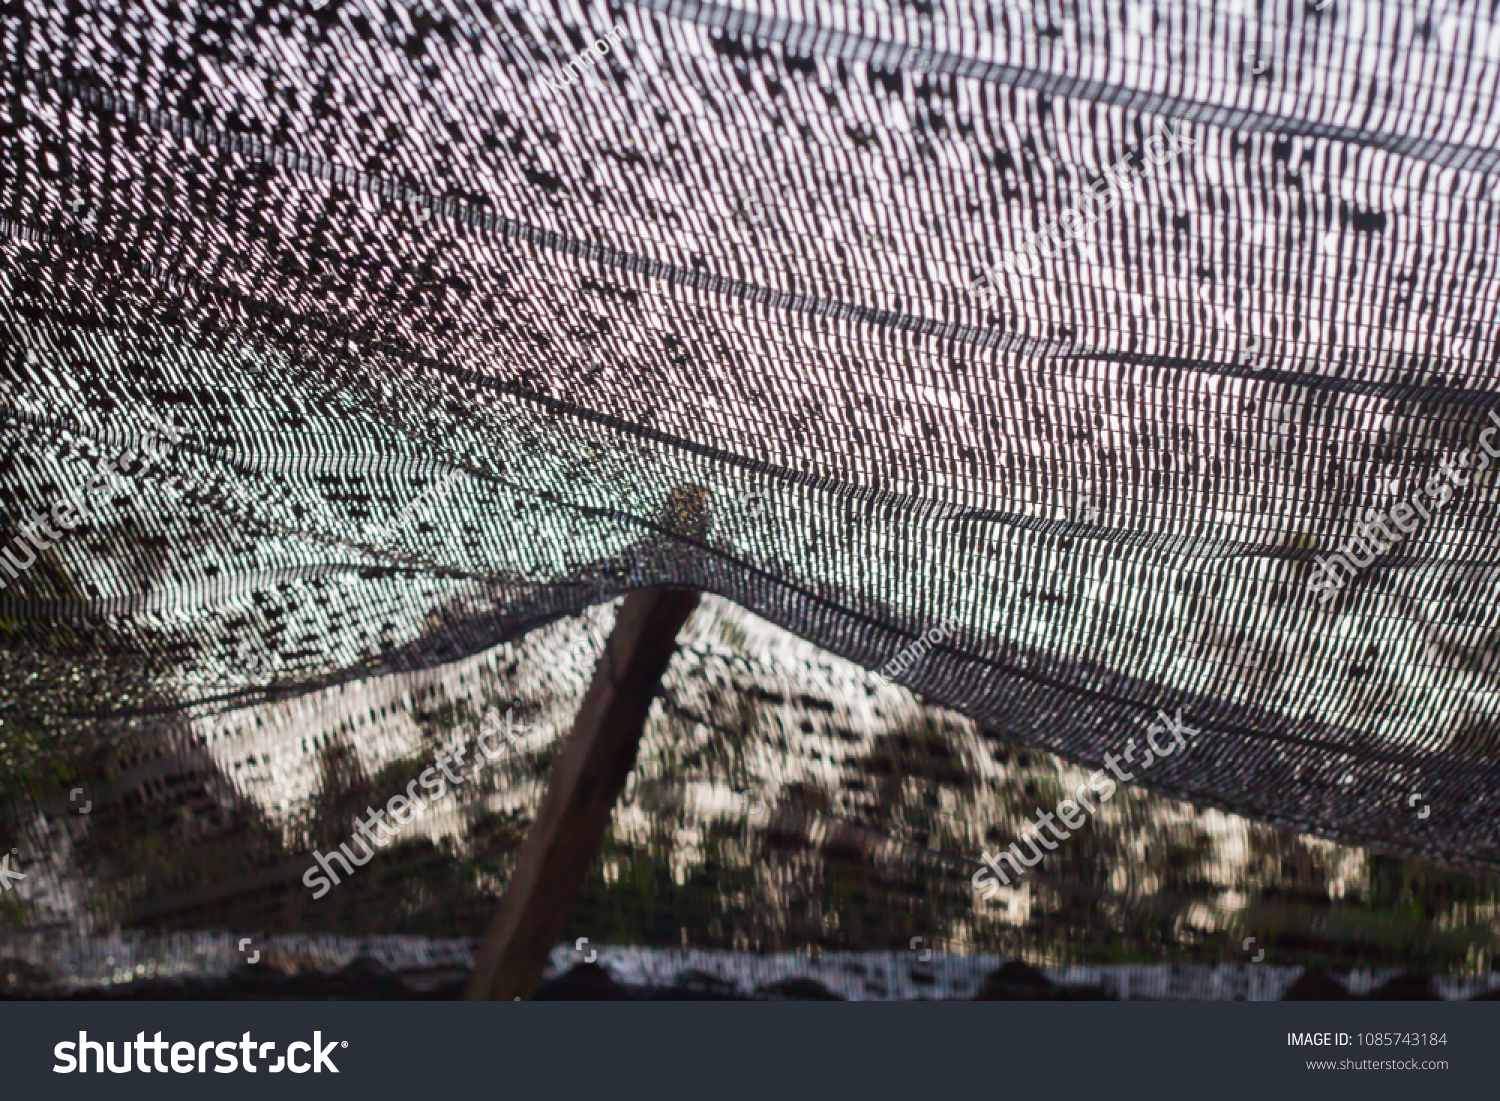 Close up black shading net pattern texture and background.Weaved plastic shade/ covers plants and materials to protect and avoid direct sunlight that could harm the object underneath. #1085743184